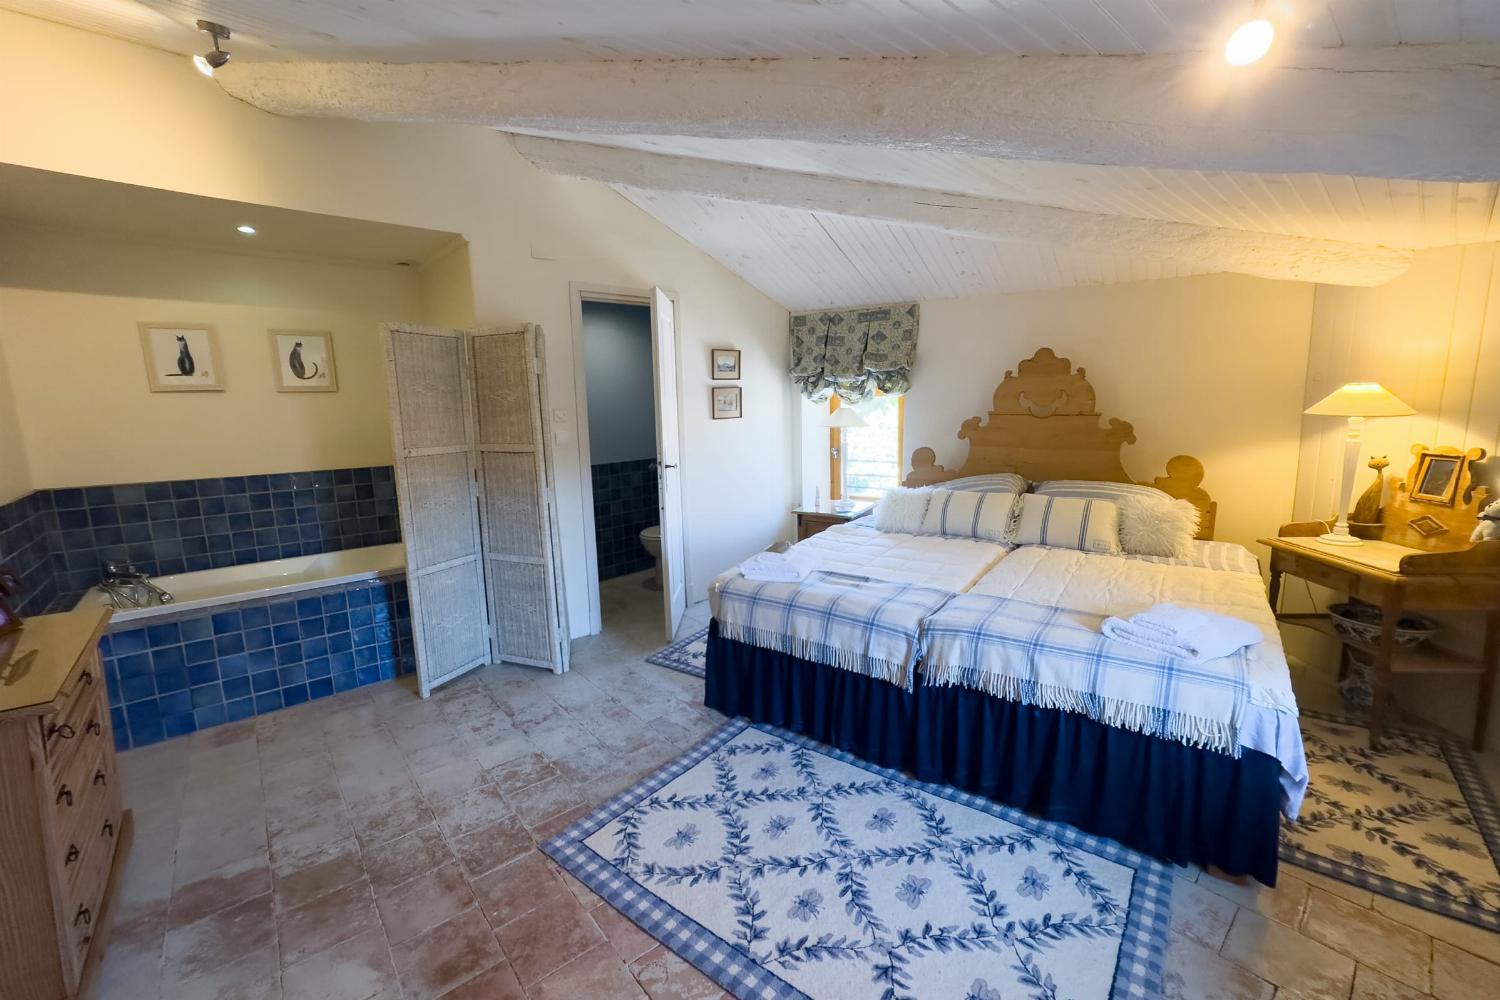  Bedroom | Holiday home in the South of France